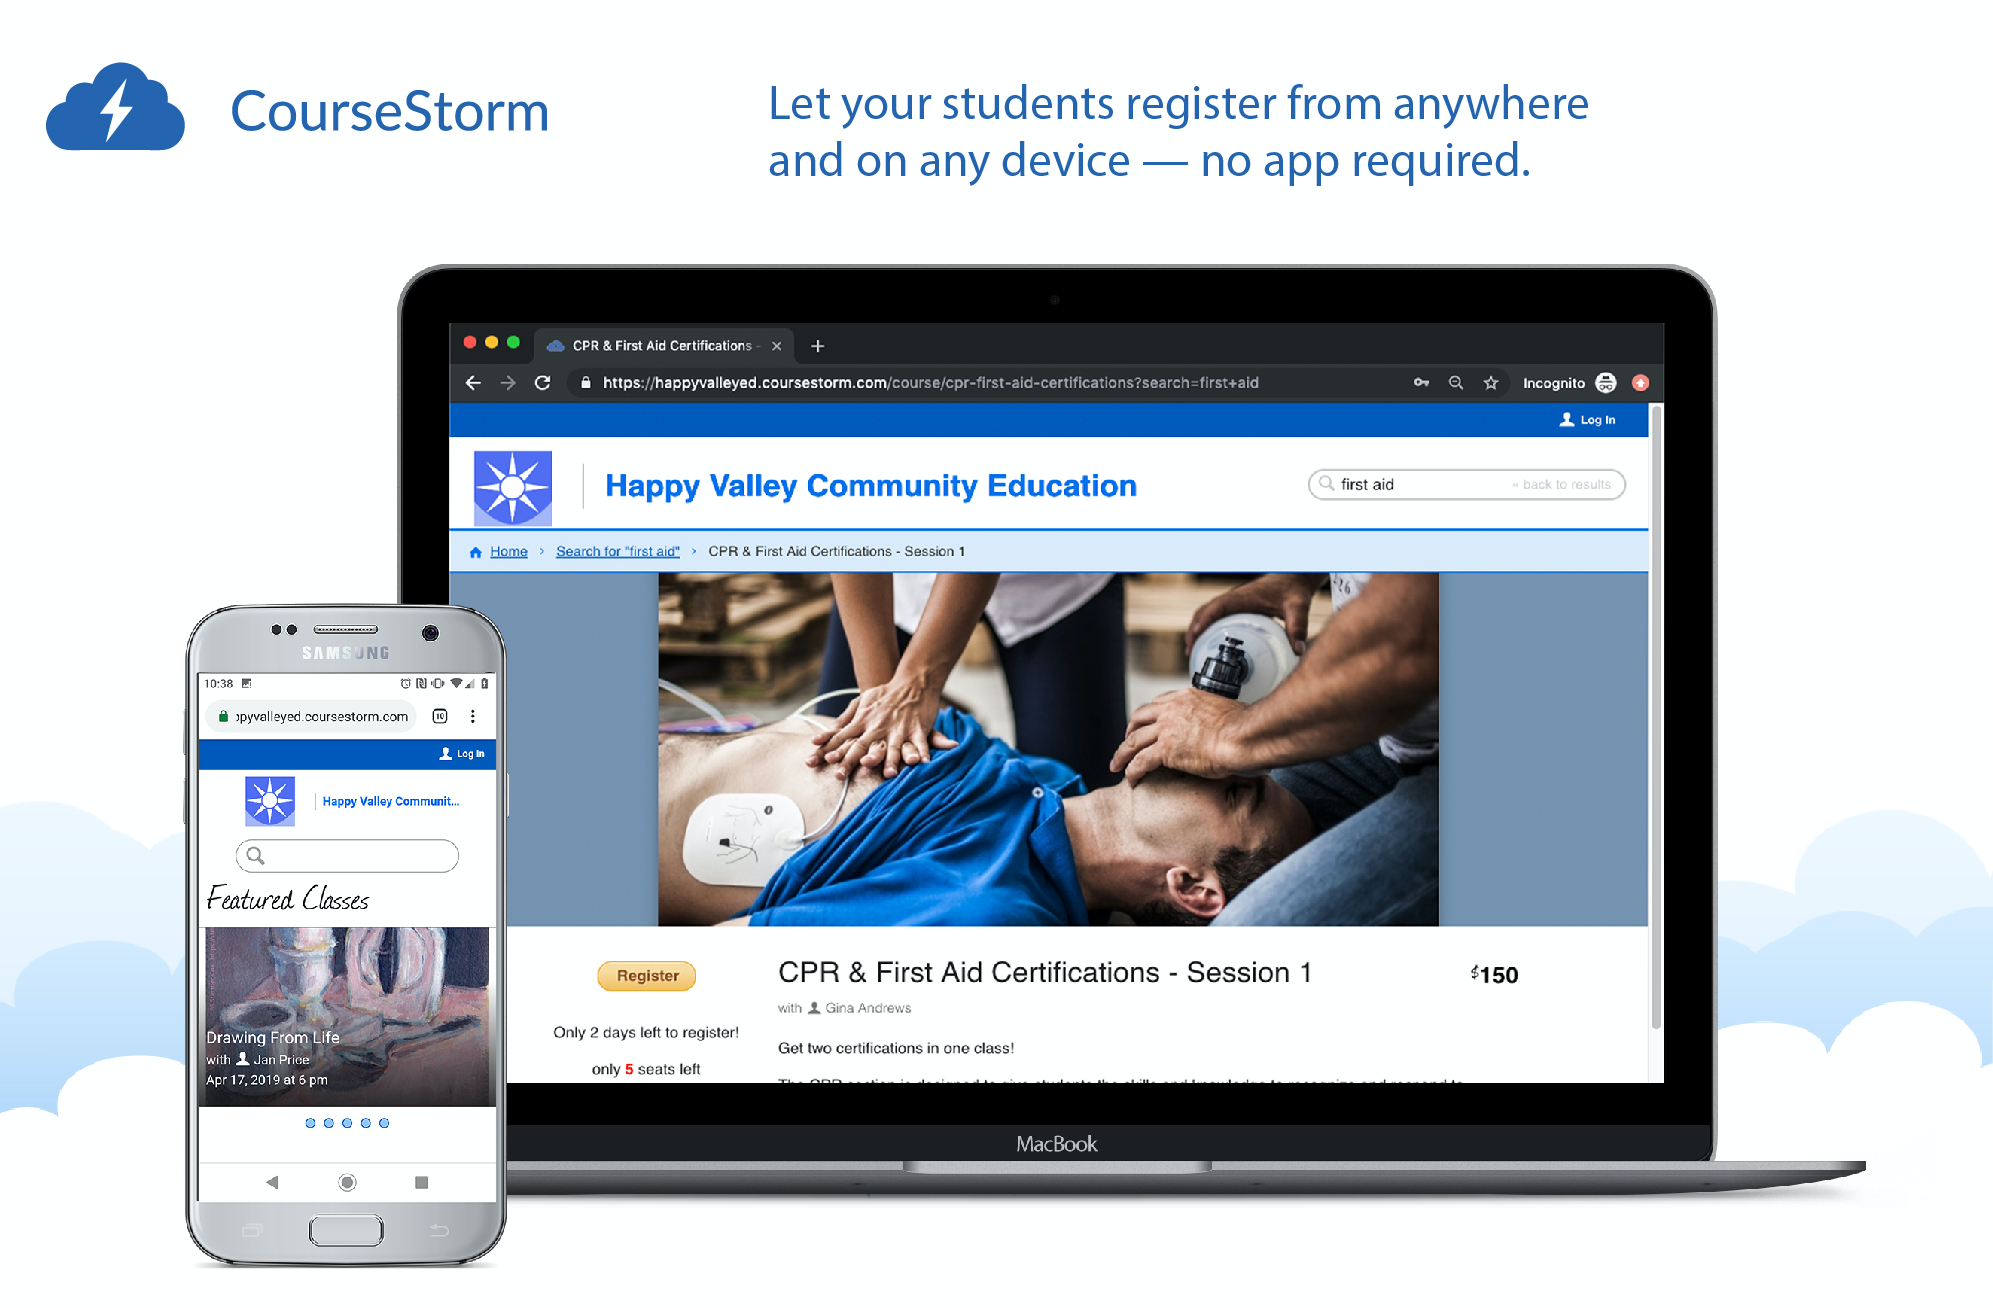 CourseStorm Software - Let your students register from anywhere and on any device --no app required.